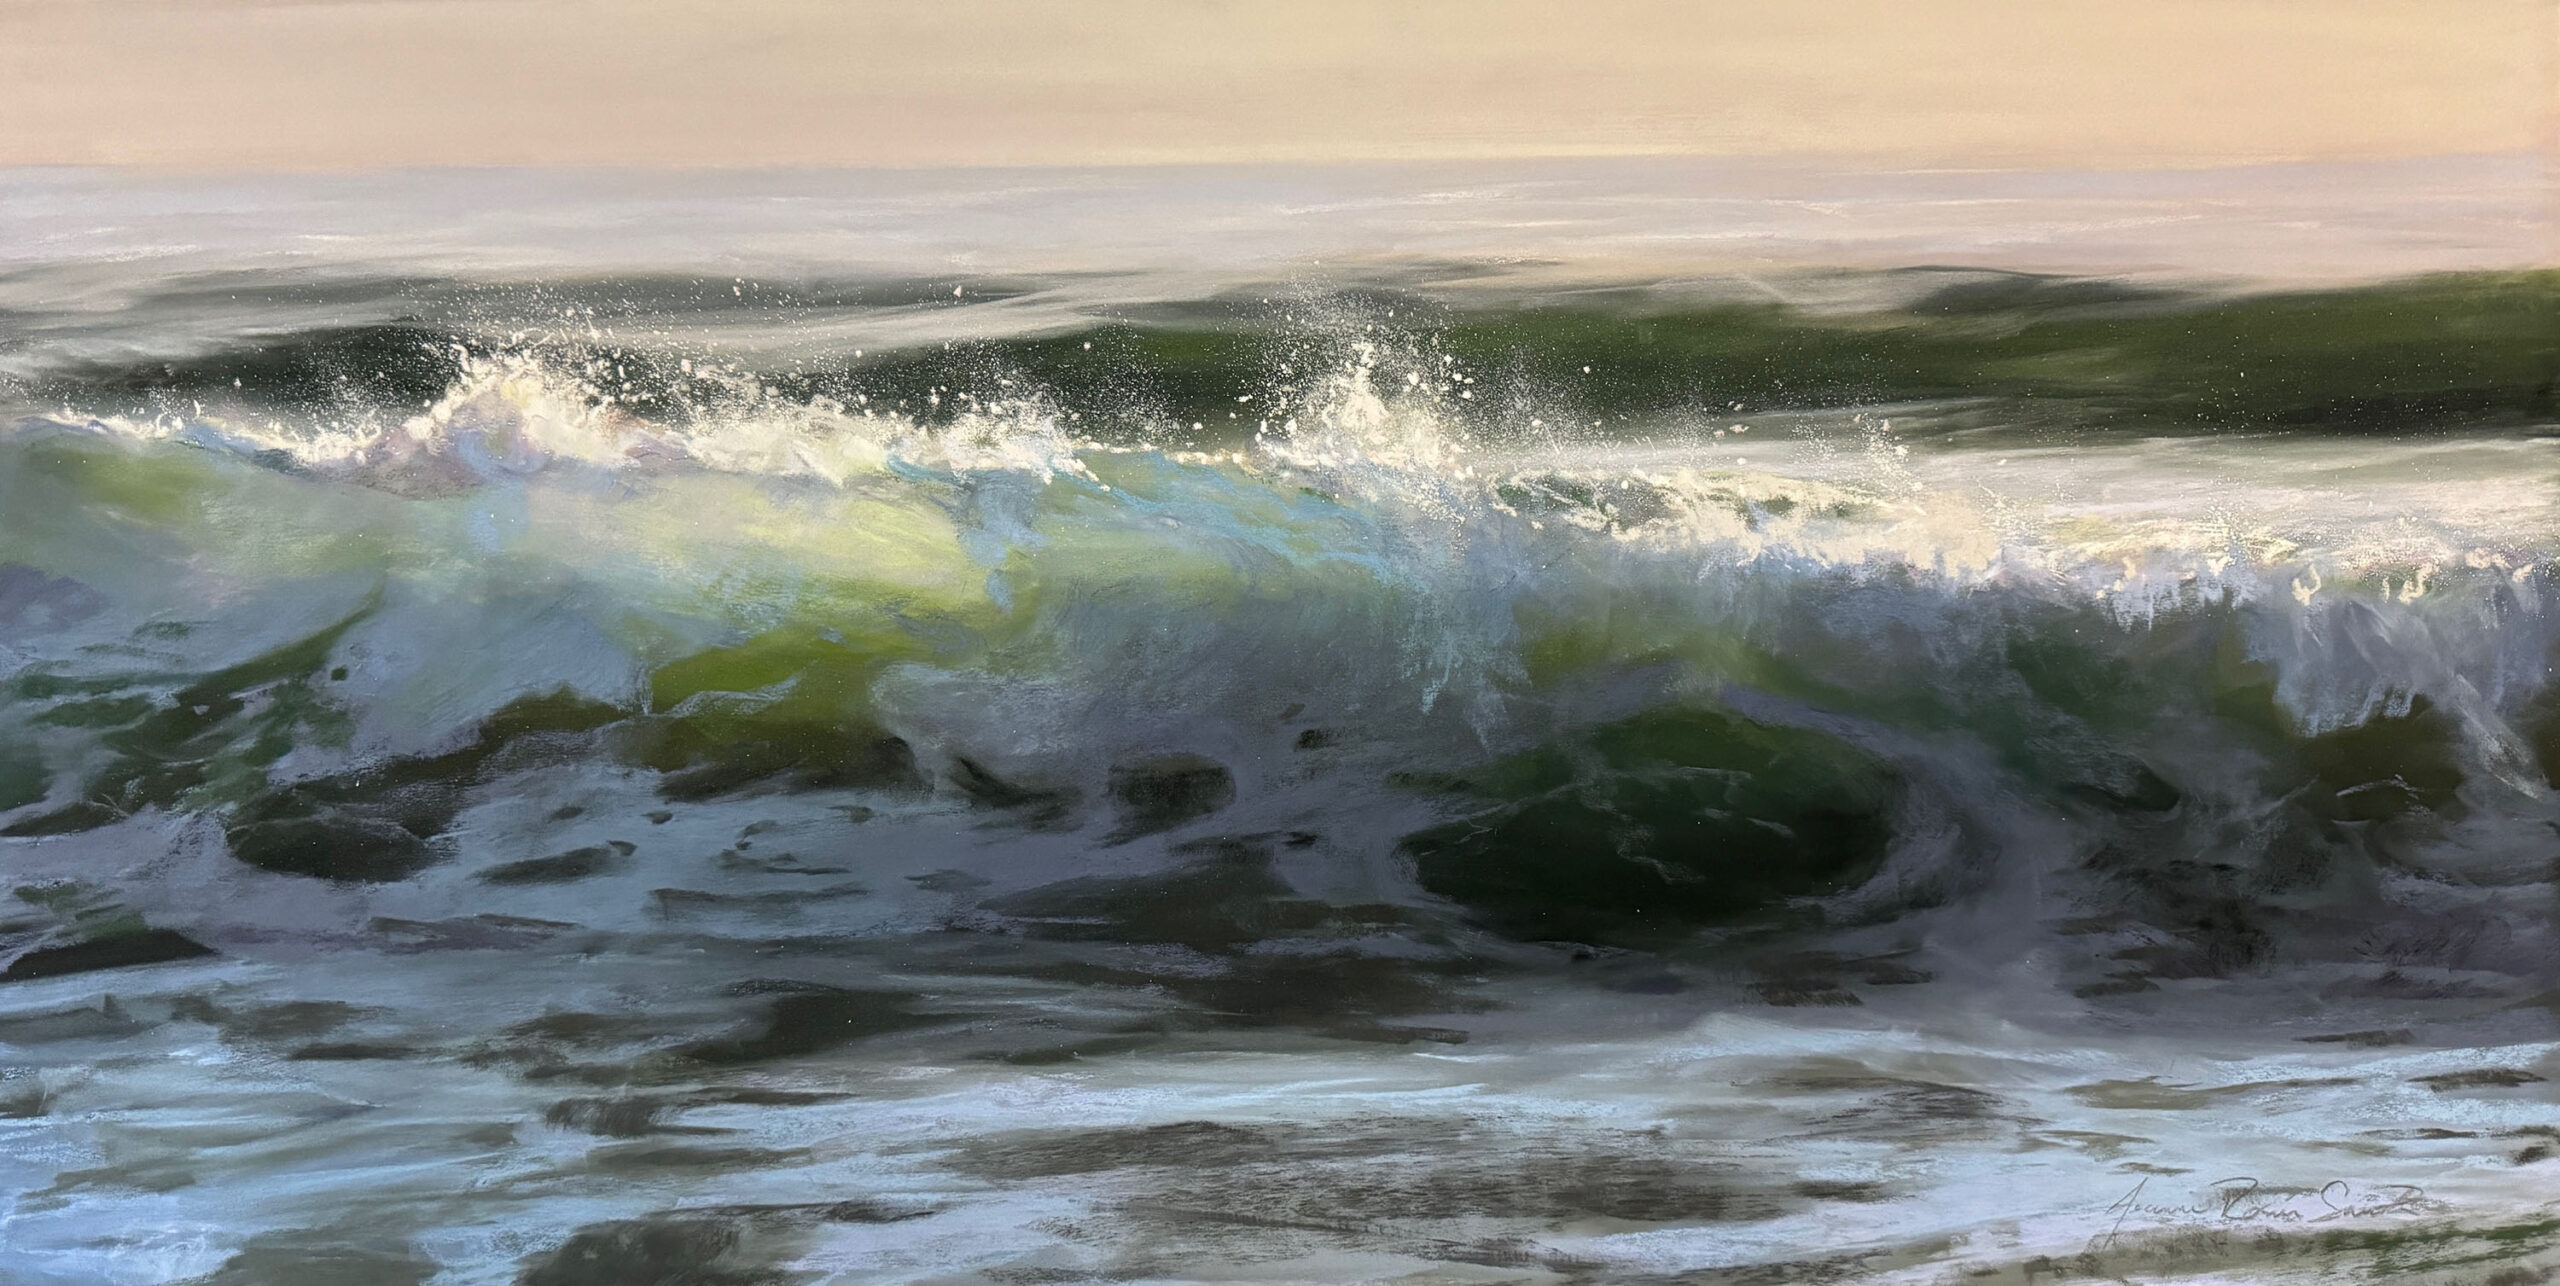 Jeanne Rosier Smith, “Dreaming of Morning,” Pastel,18 x 36 inches